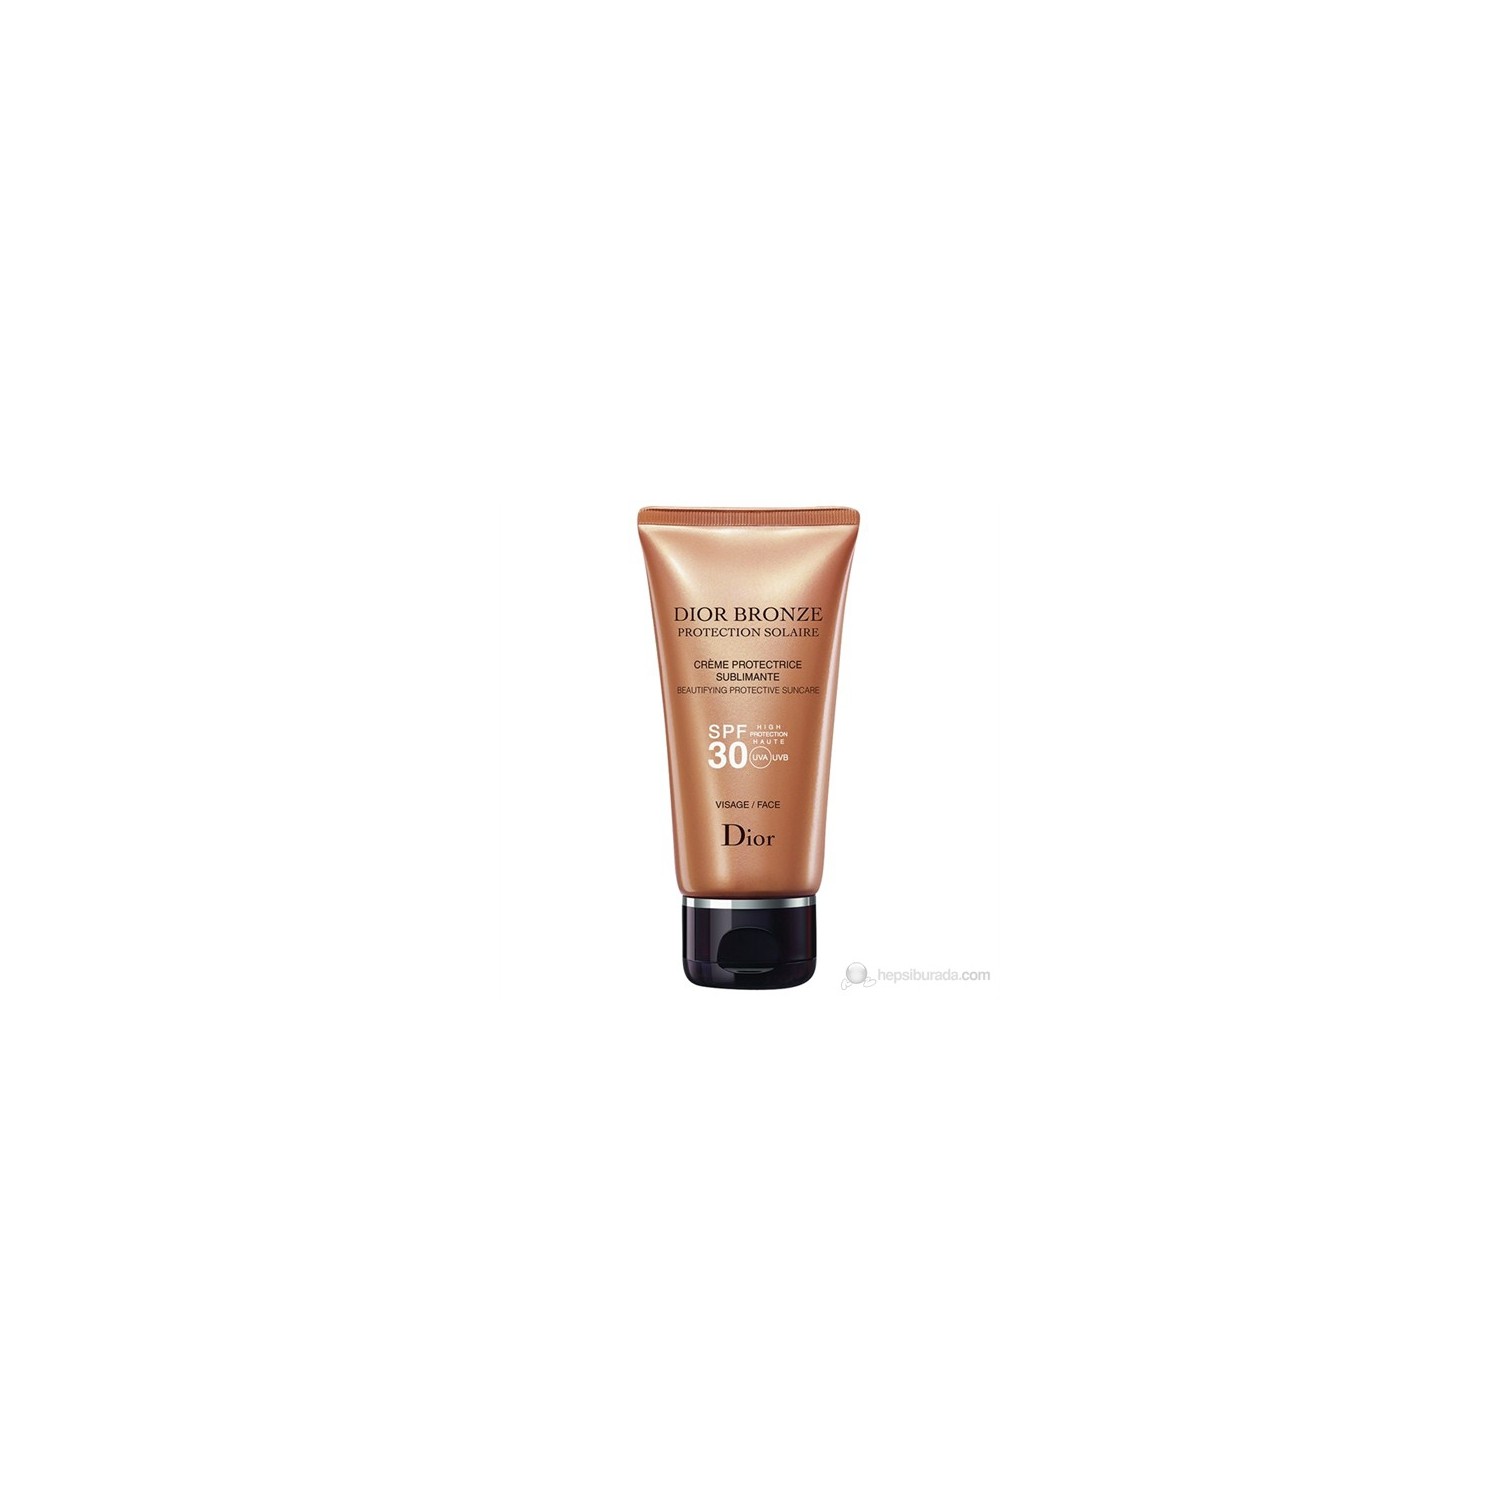 Christian Dior Dior Bronze Beautifying Protective Creme Sublime Glow SPF30  50ml  Price 